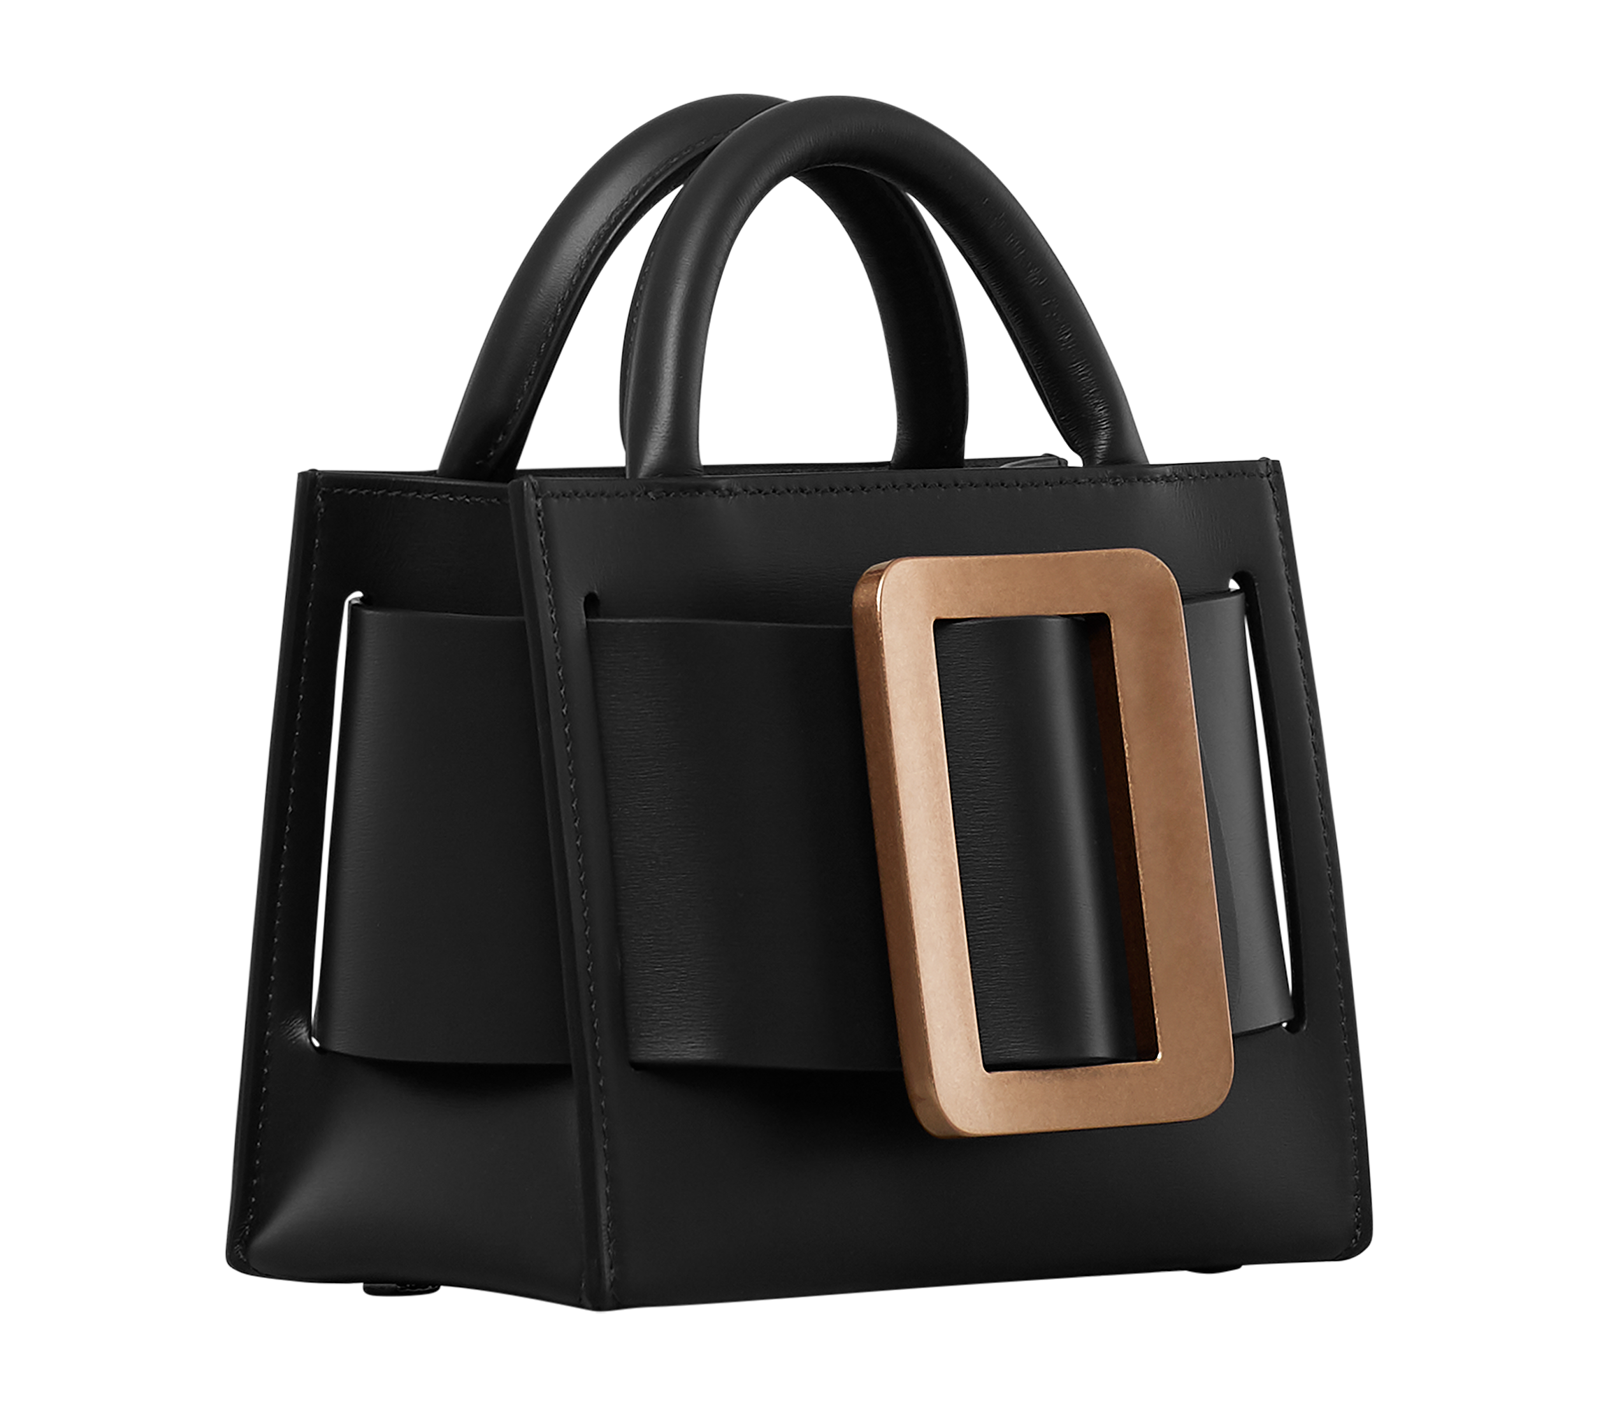 Bobby 18 buckled leather tote